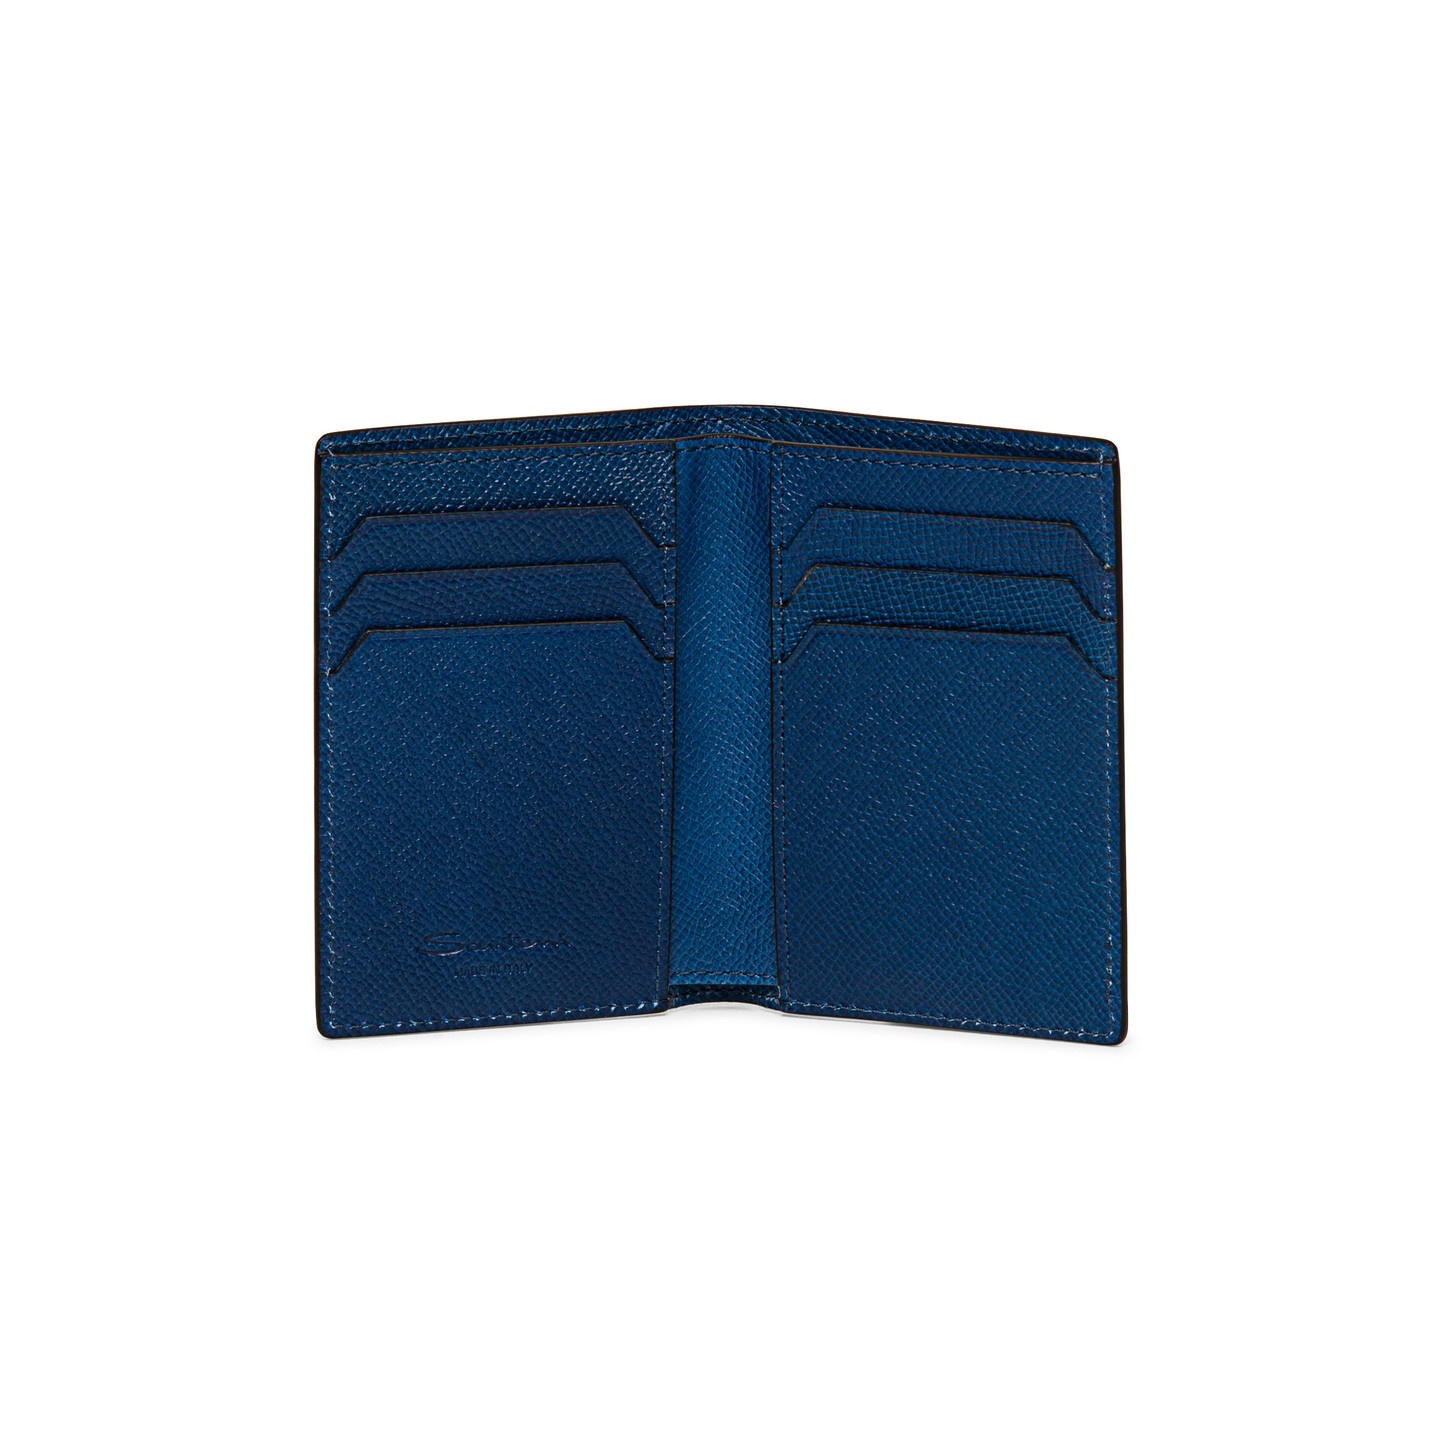 Blue saffiano leather vertical wallet - 3